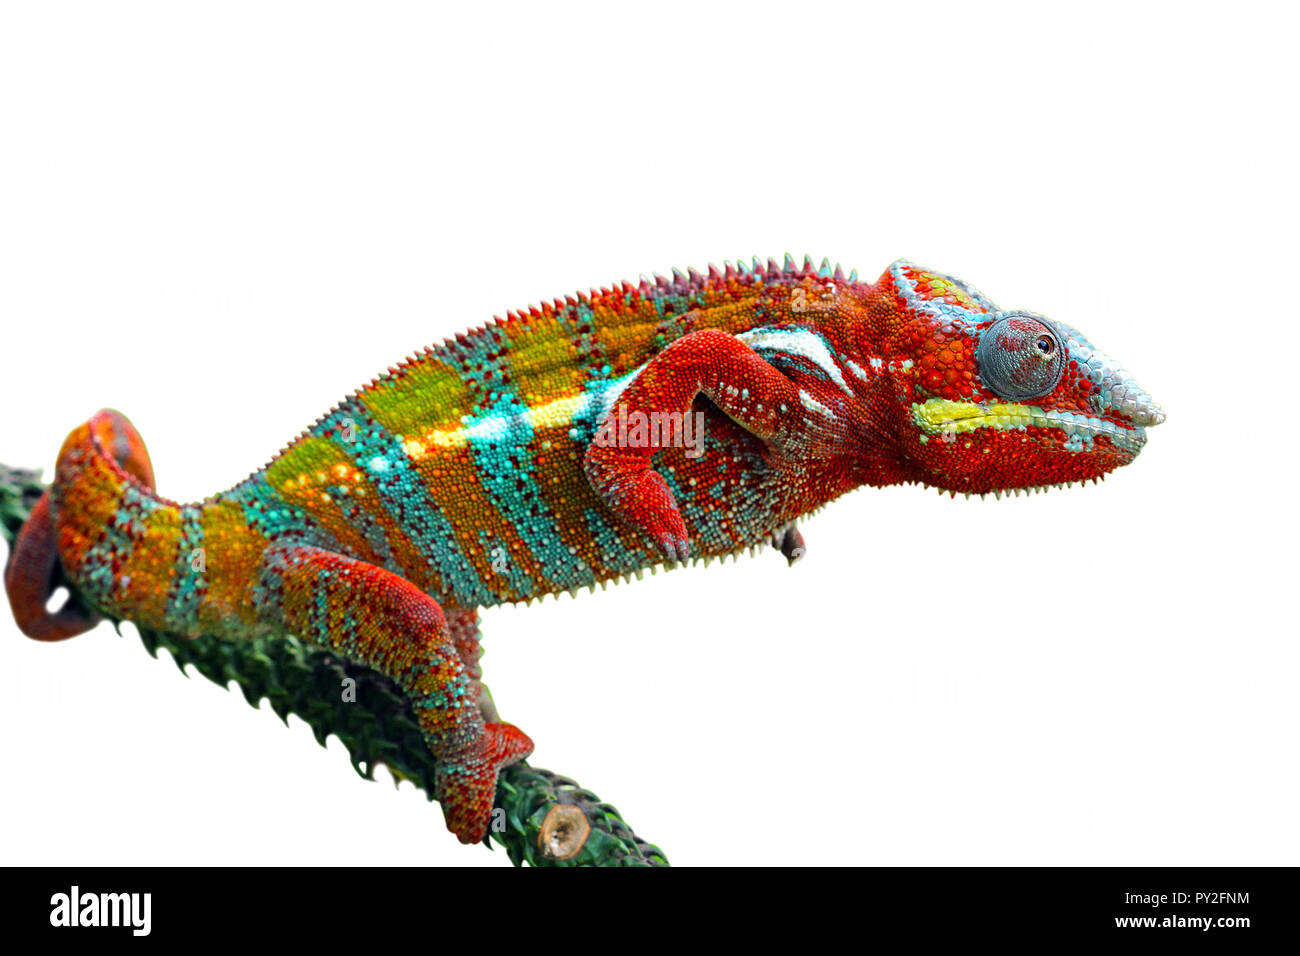 Panther chameleon on a branch, Indonesia Stock Photo